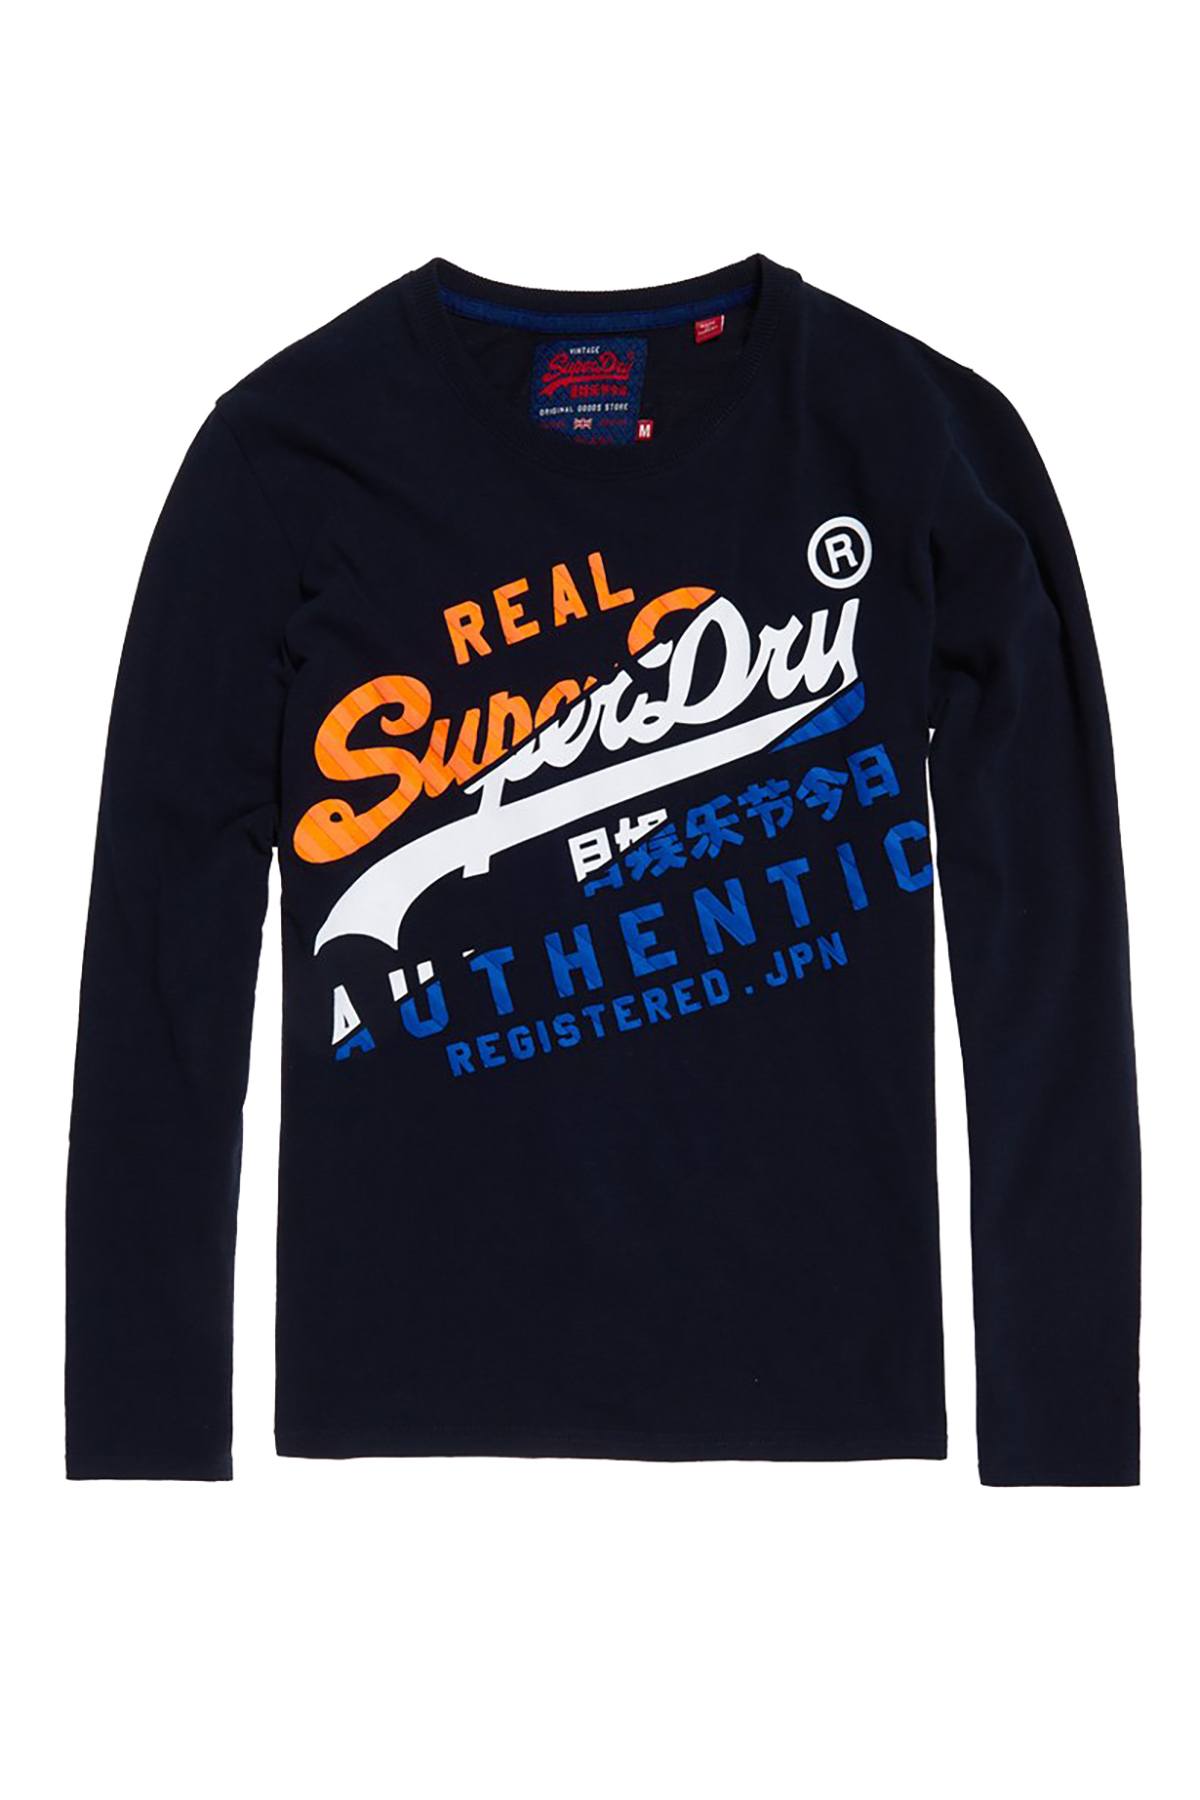 SuperDry Eclipse-Navy Long-Sleeve CheapUndies – T-Shirt Authentic XL Vintage